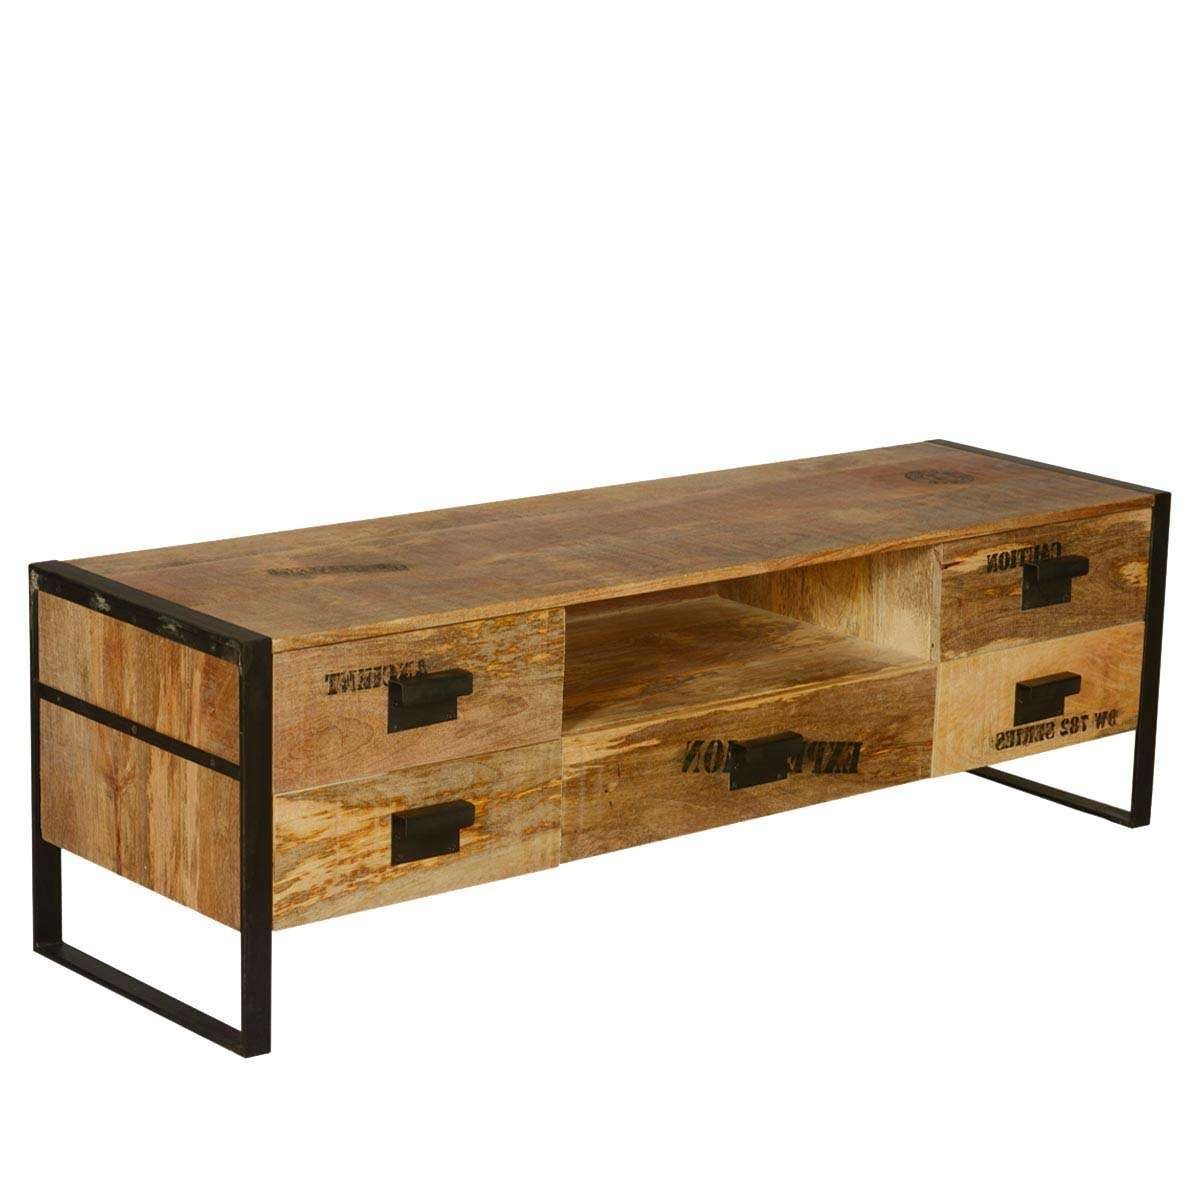 Expedition Mango Wood & Iron Tv Stand Media Cabinet Intended For Mango Wood Tv Stands (View 1 of 15)